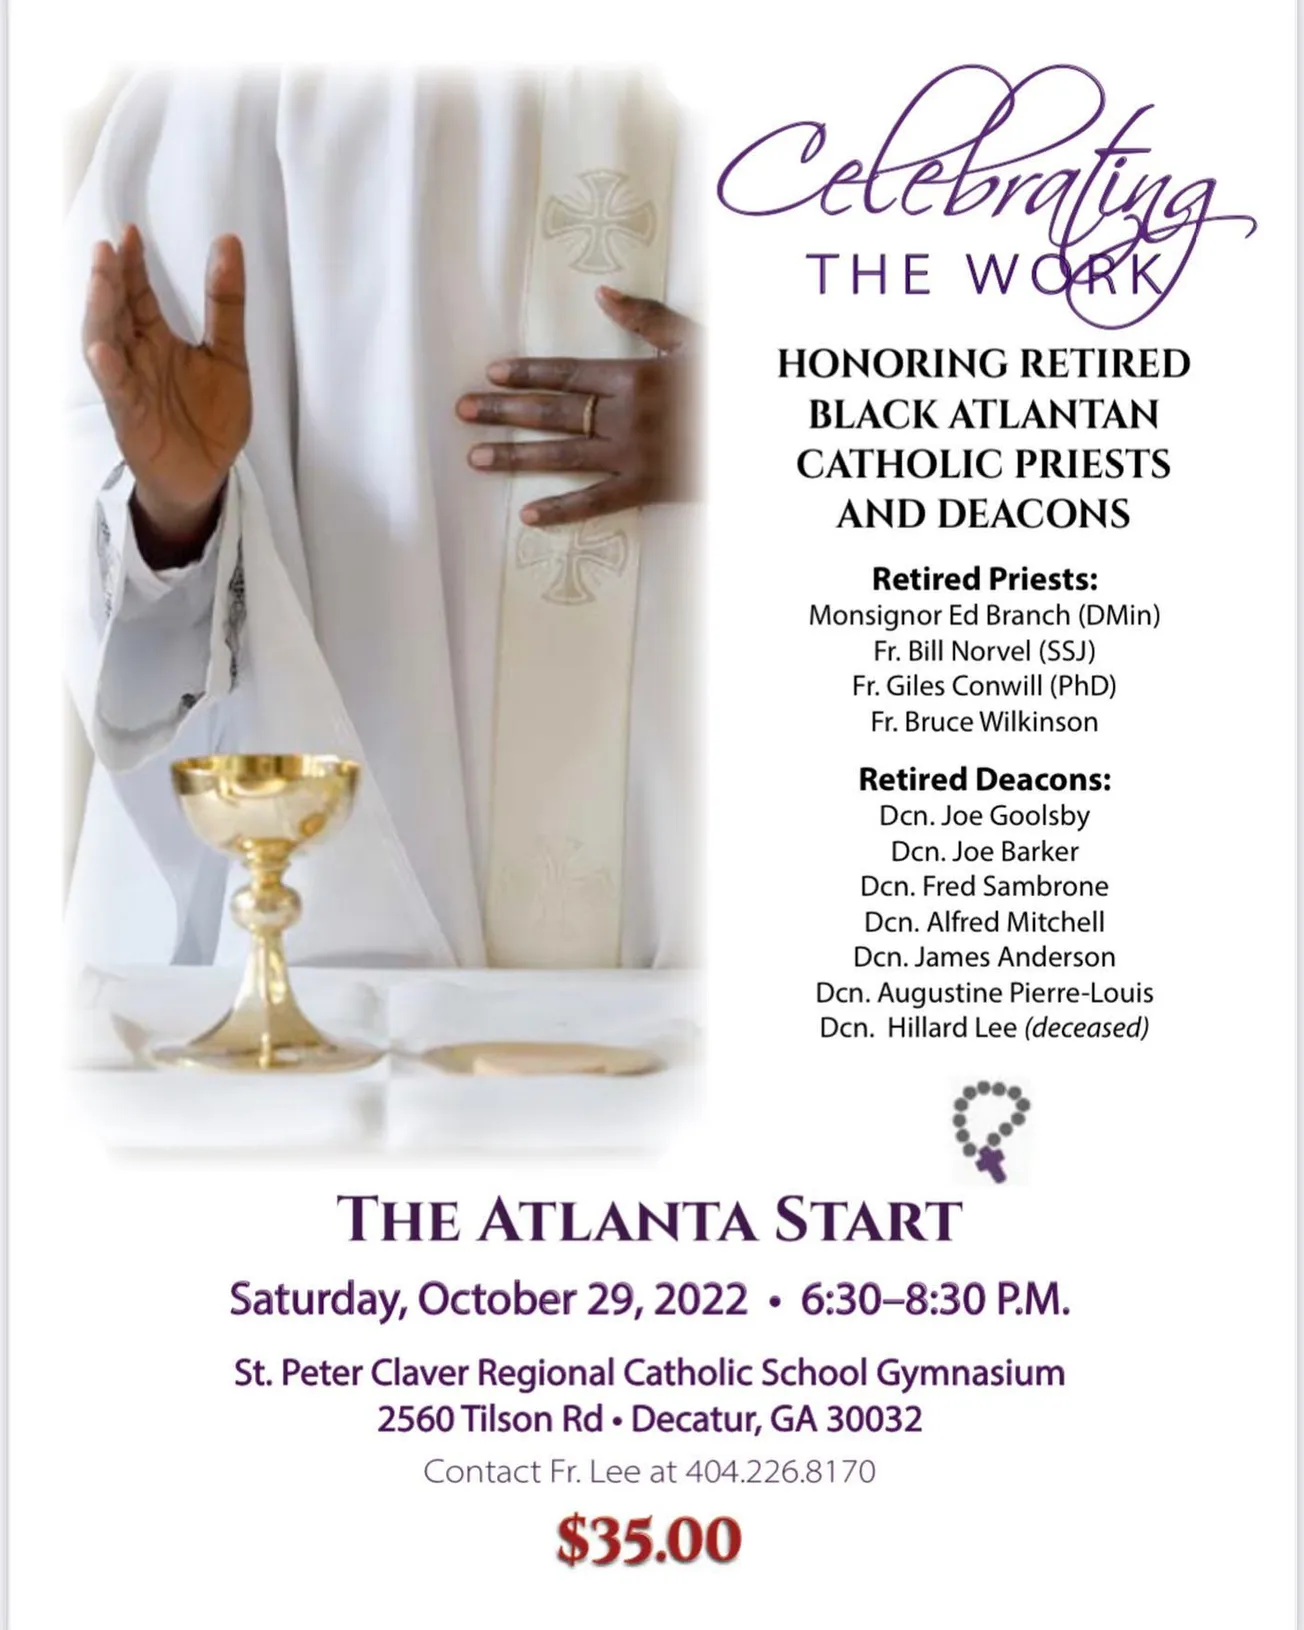 Retired Black Catholic clergy in Atlanta to be honored in event Oct. 29